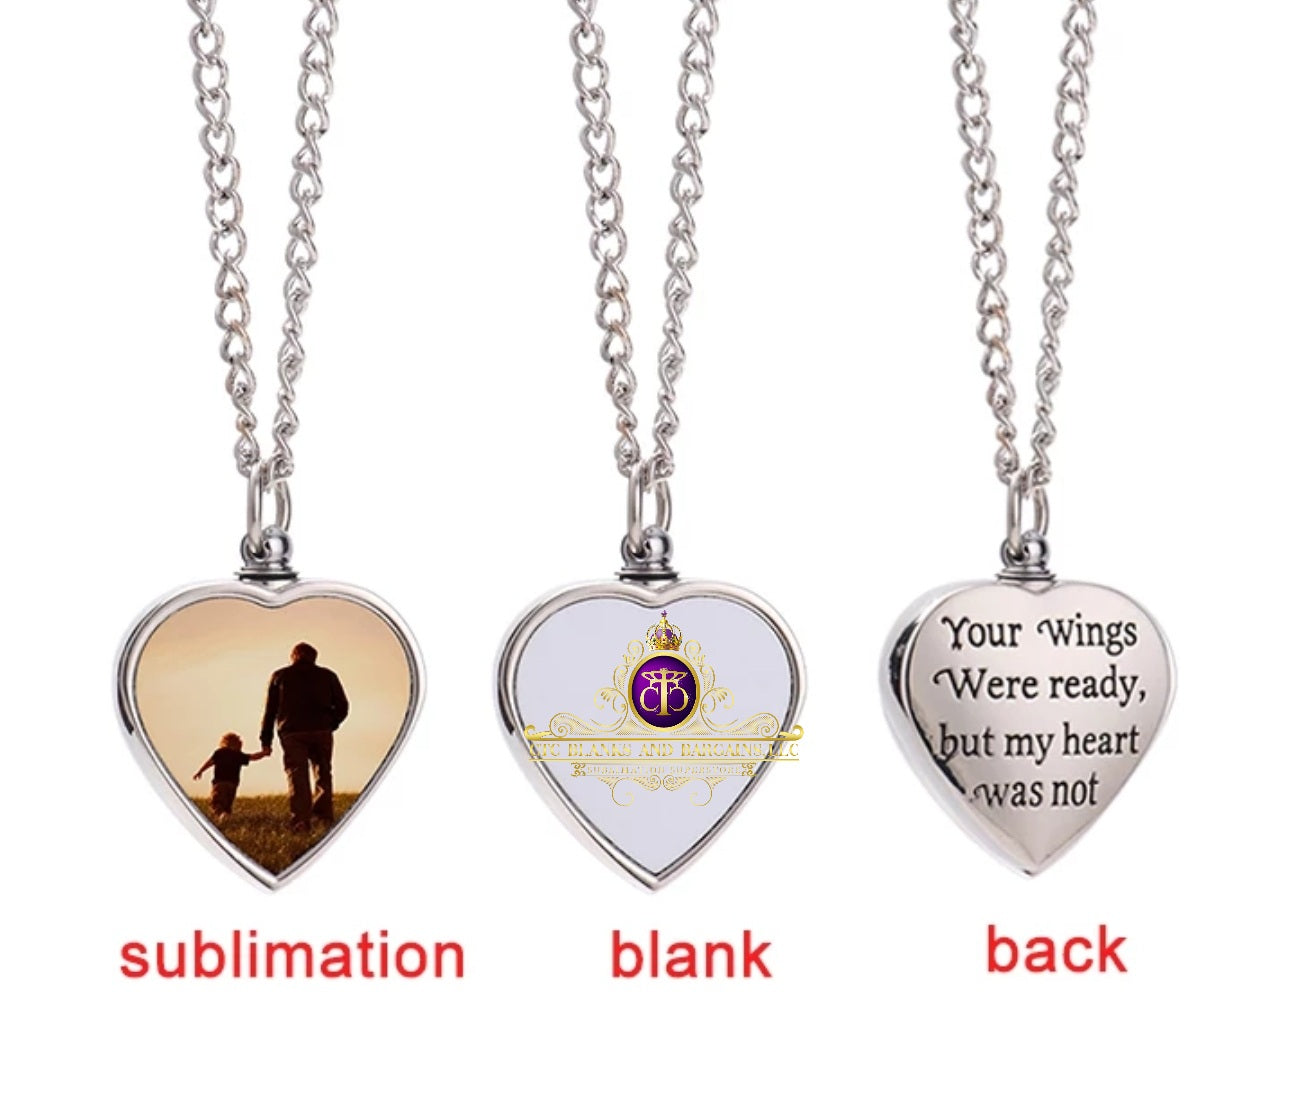 Urn Heart Pendant and Necklace Set